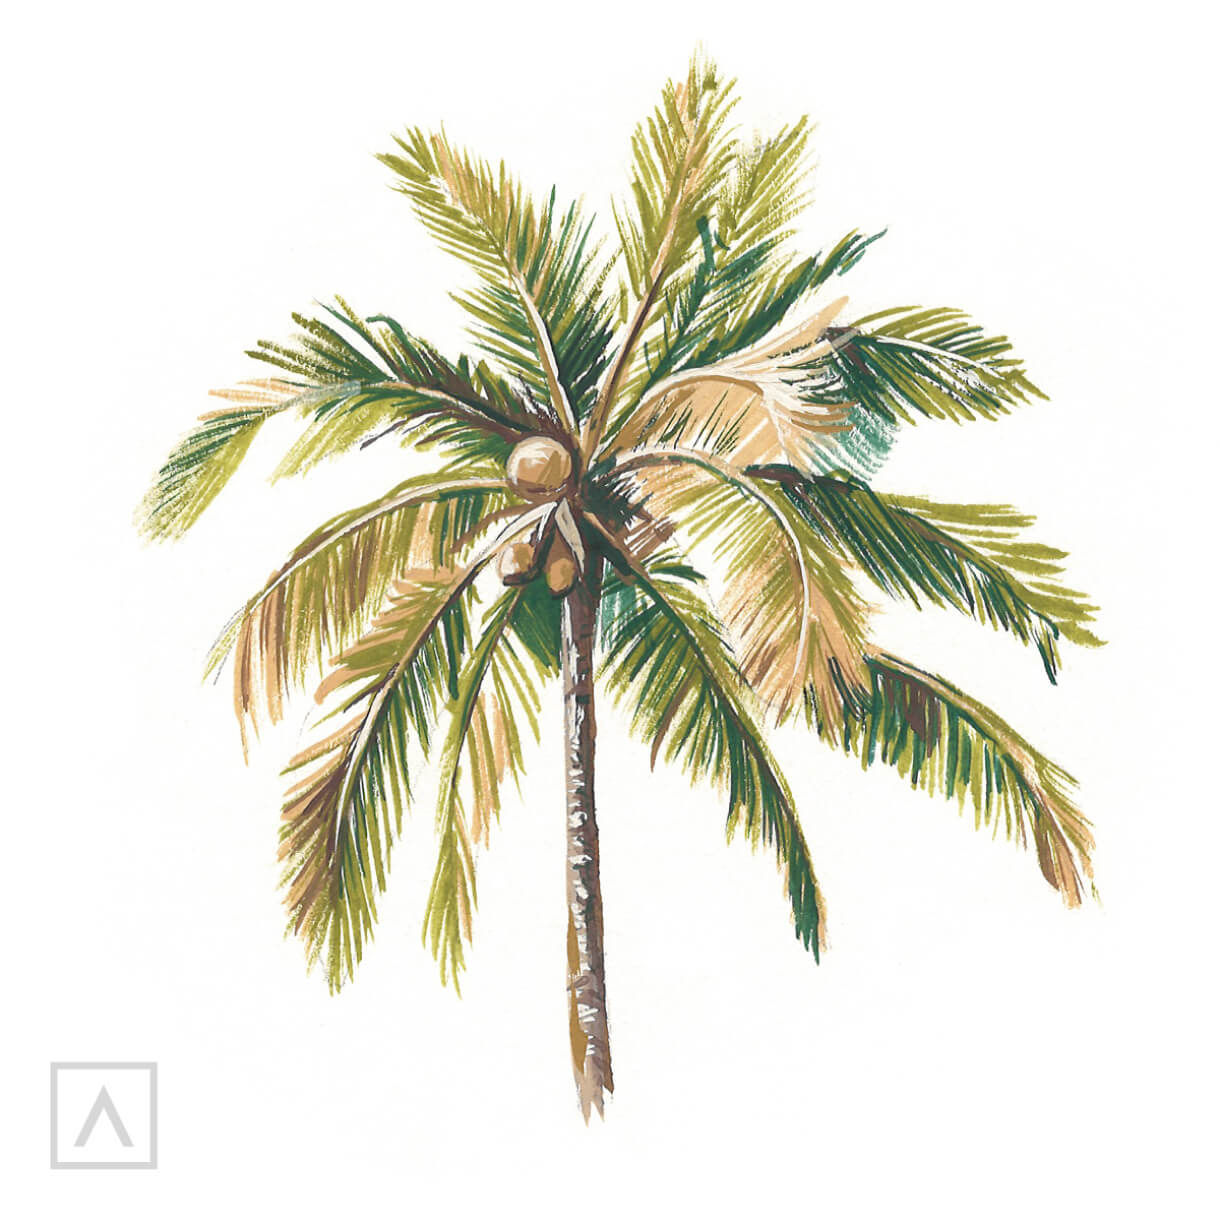 Palm tree drawing - How to draw a palm tree - Easy drawings easy